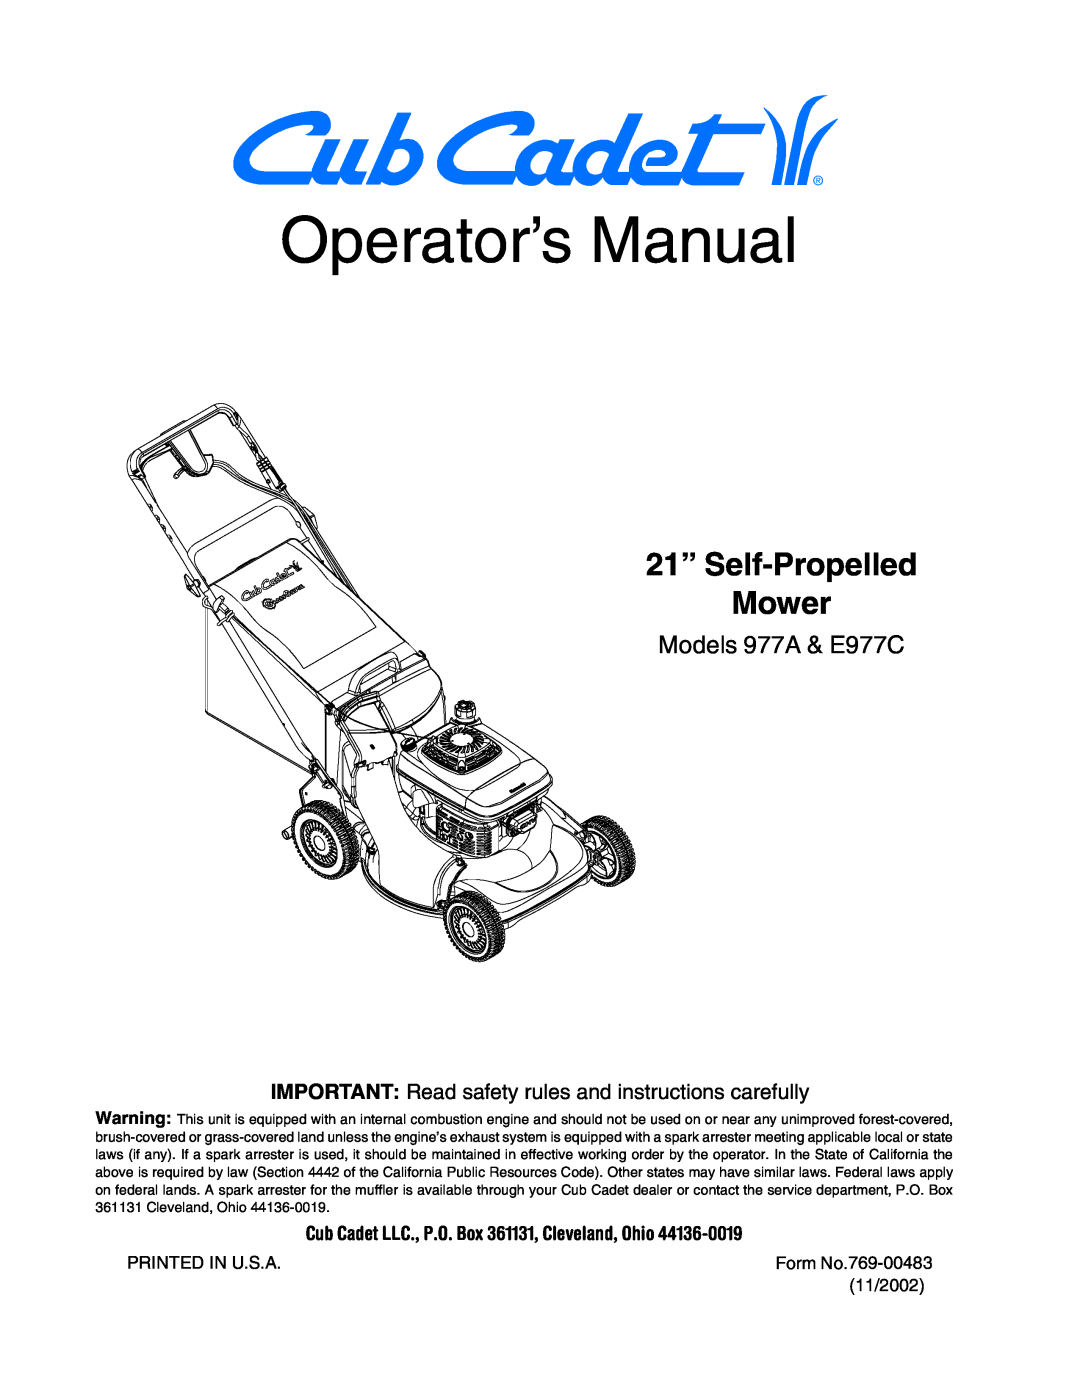 Cub Cadet E977C manual IMPORTANT Read safety rules and instructions carefully, Operator’s Manual, 21” Self-Propelled Mower 